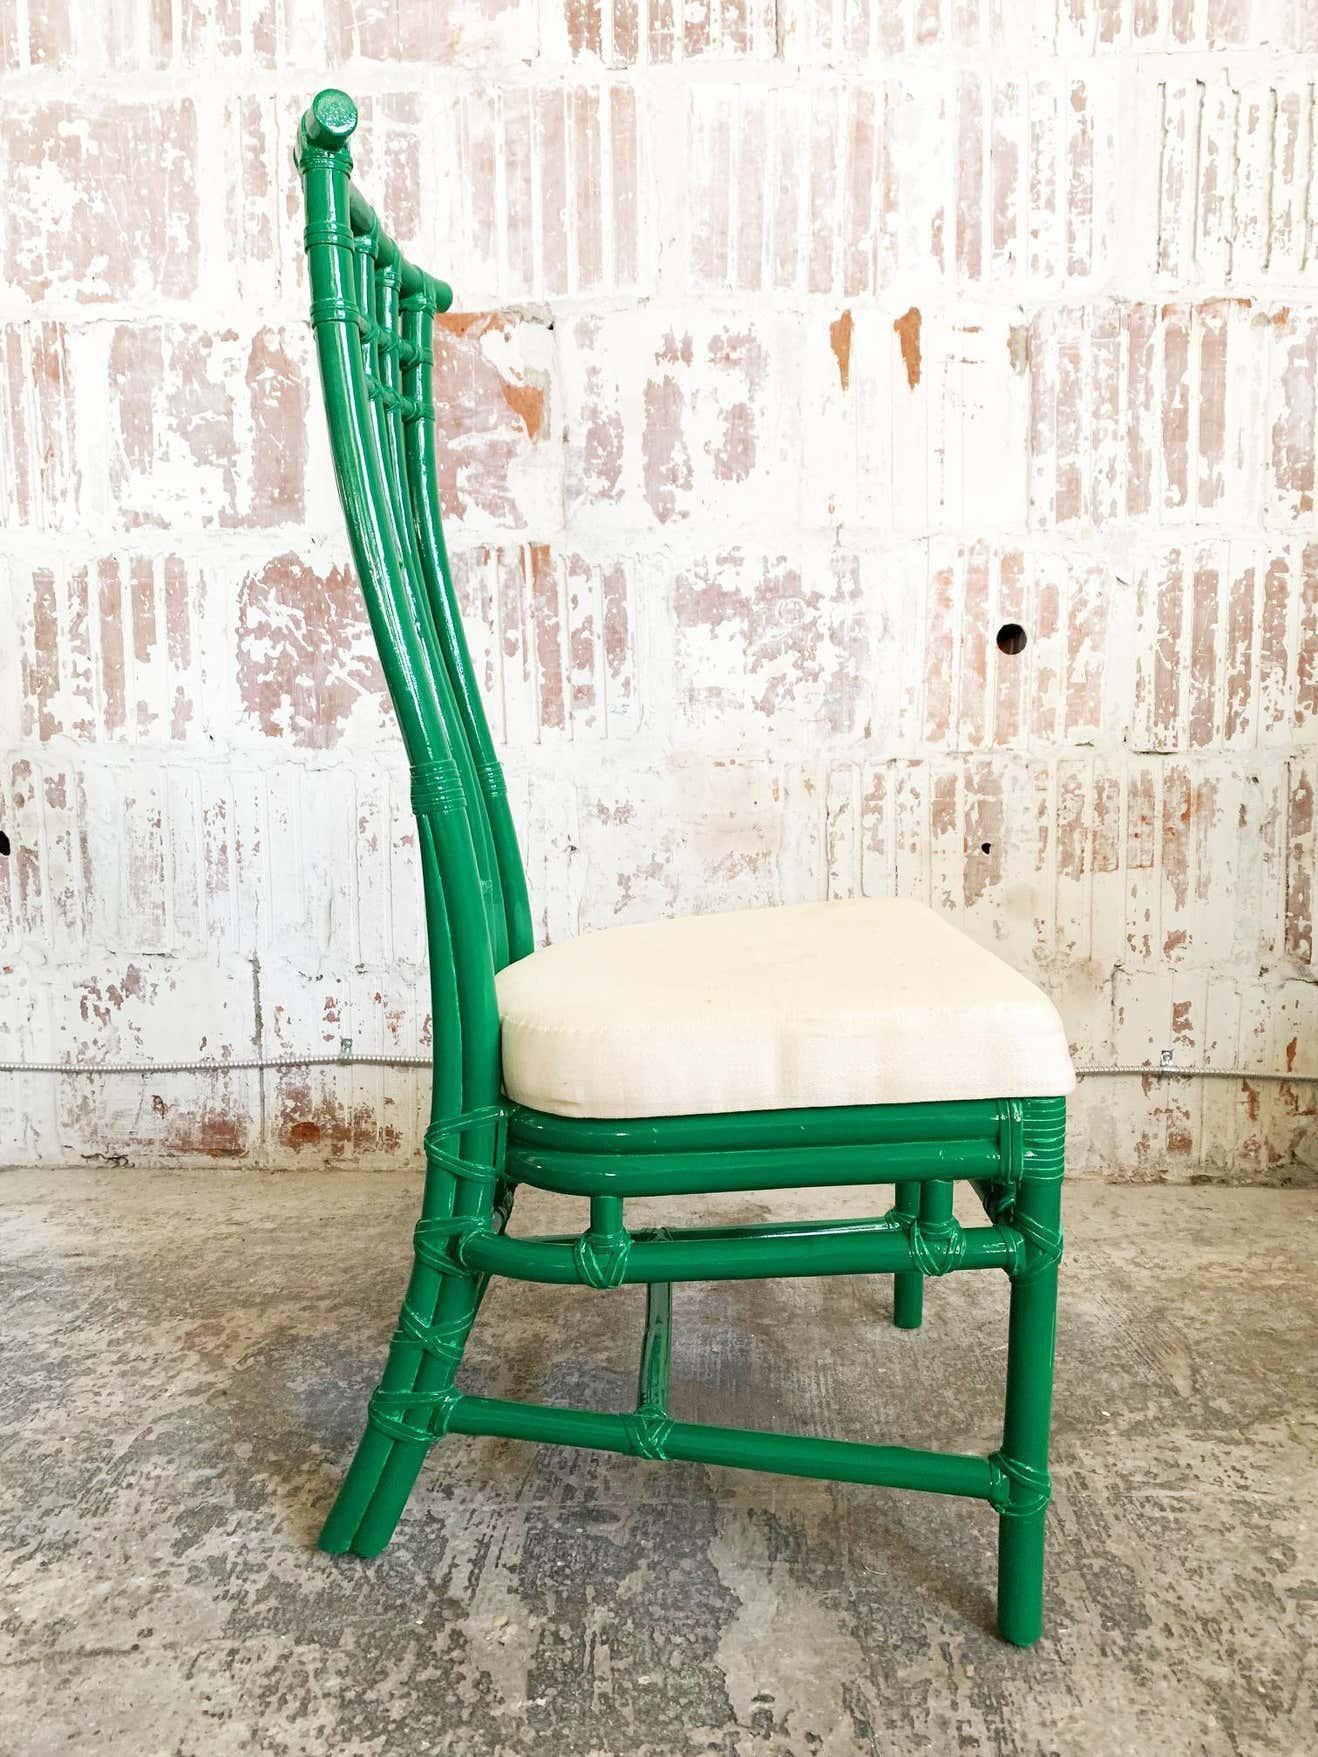 Set of 6 McGuire bamboo pagoda high back dining chairs. Newly lacquered in high gloss green. Good vintage condition with minor imperfections to the newly lacquered finish. May exhibit scuffs, marks, or wear, see photos for details.
For a shipping